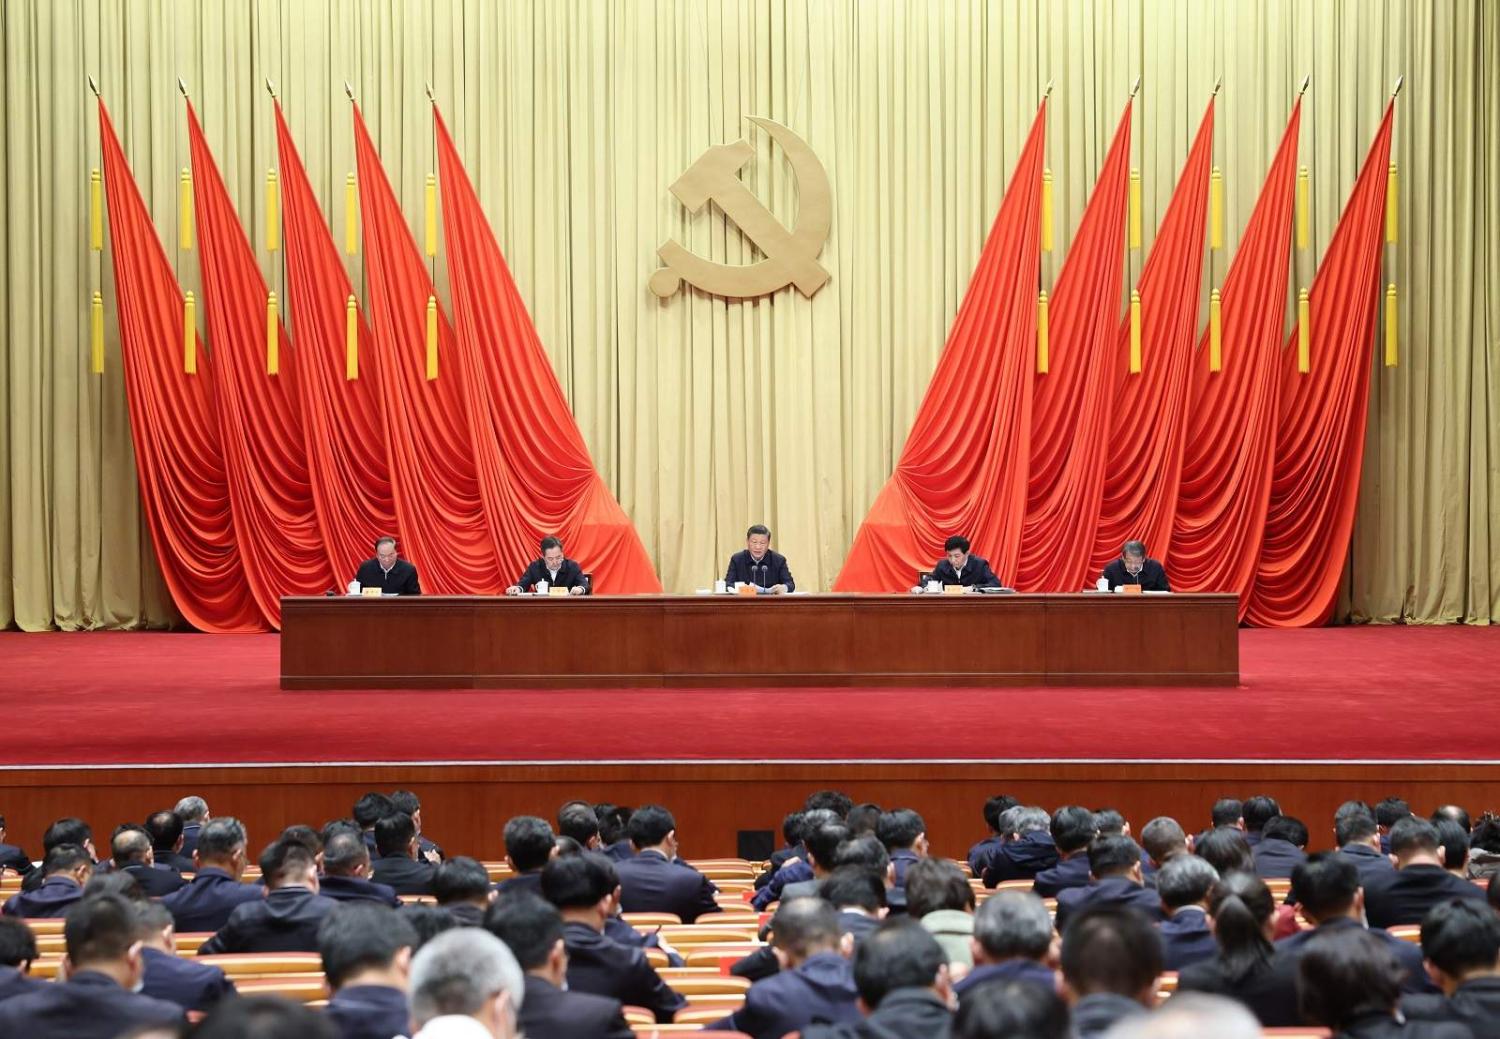 Chinese President Xi Jinping addresses the Party School of the CPC Central Committee National Academy of Governance, 1 March 2022 (Liu Bin/Xinhua via Getty Images)